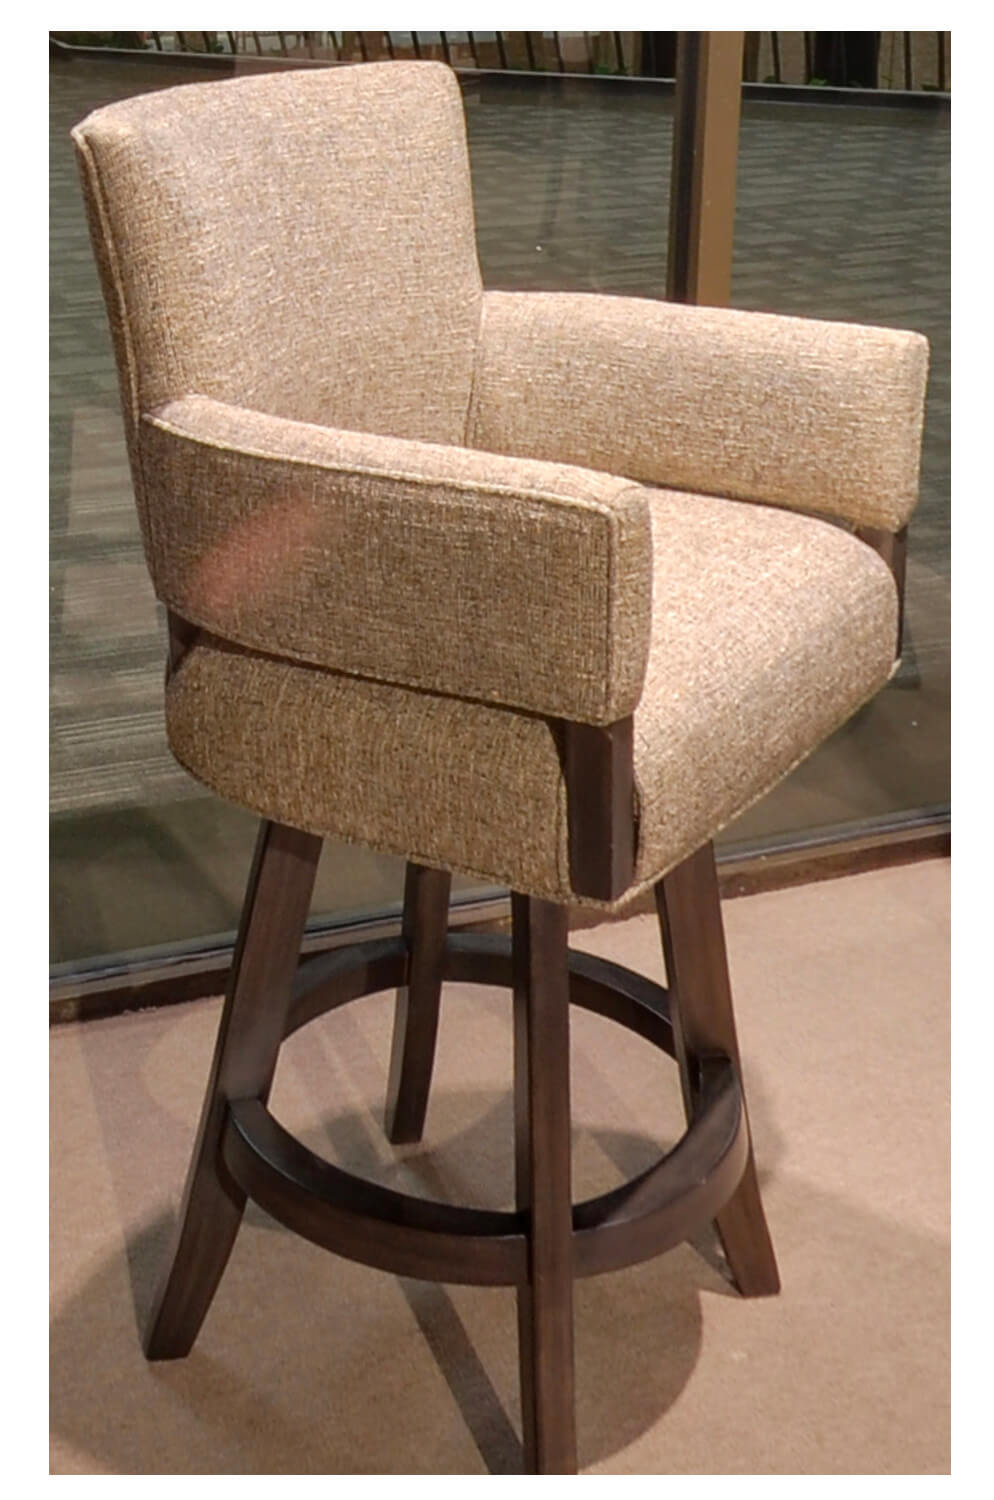 Mod Upholstered Wood Swivel Stool, Upholstered Swivel Counter Stools With Backs And Arms